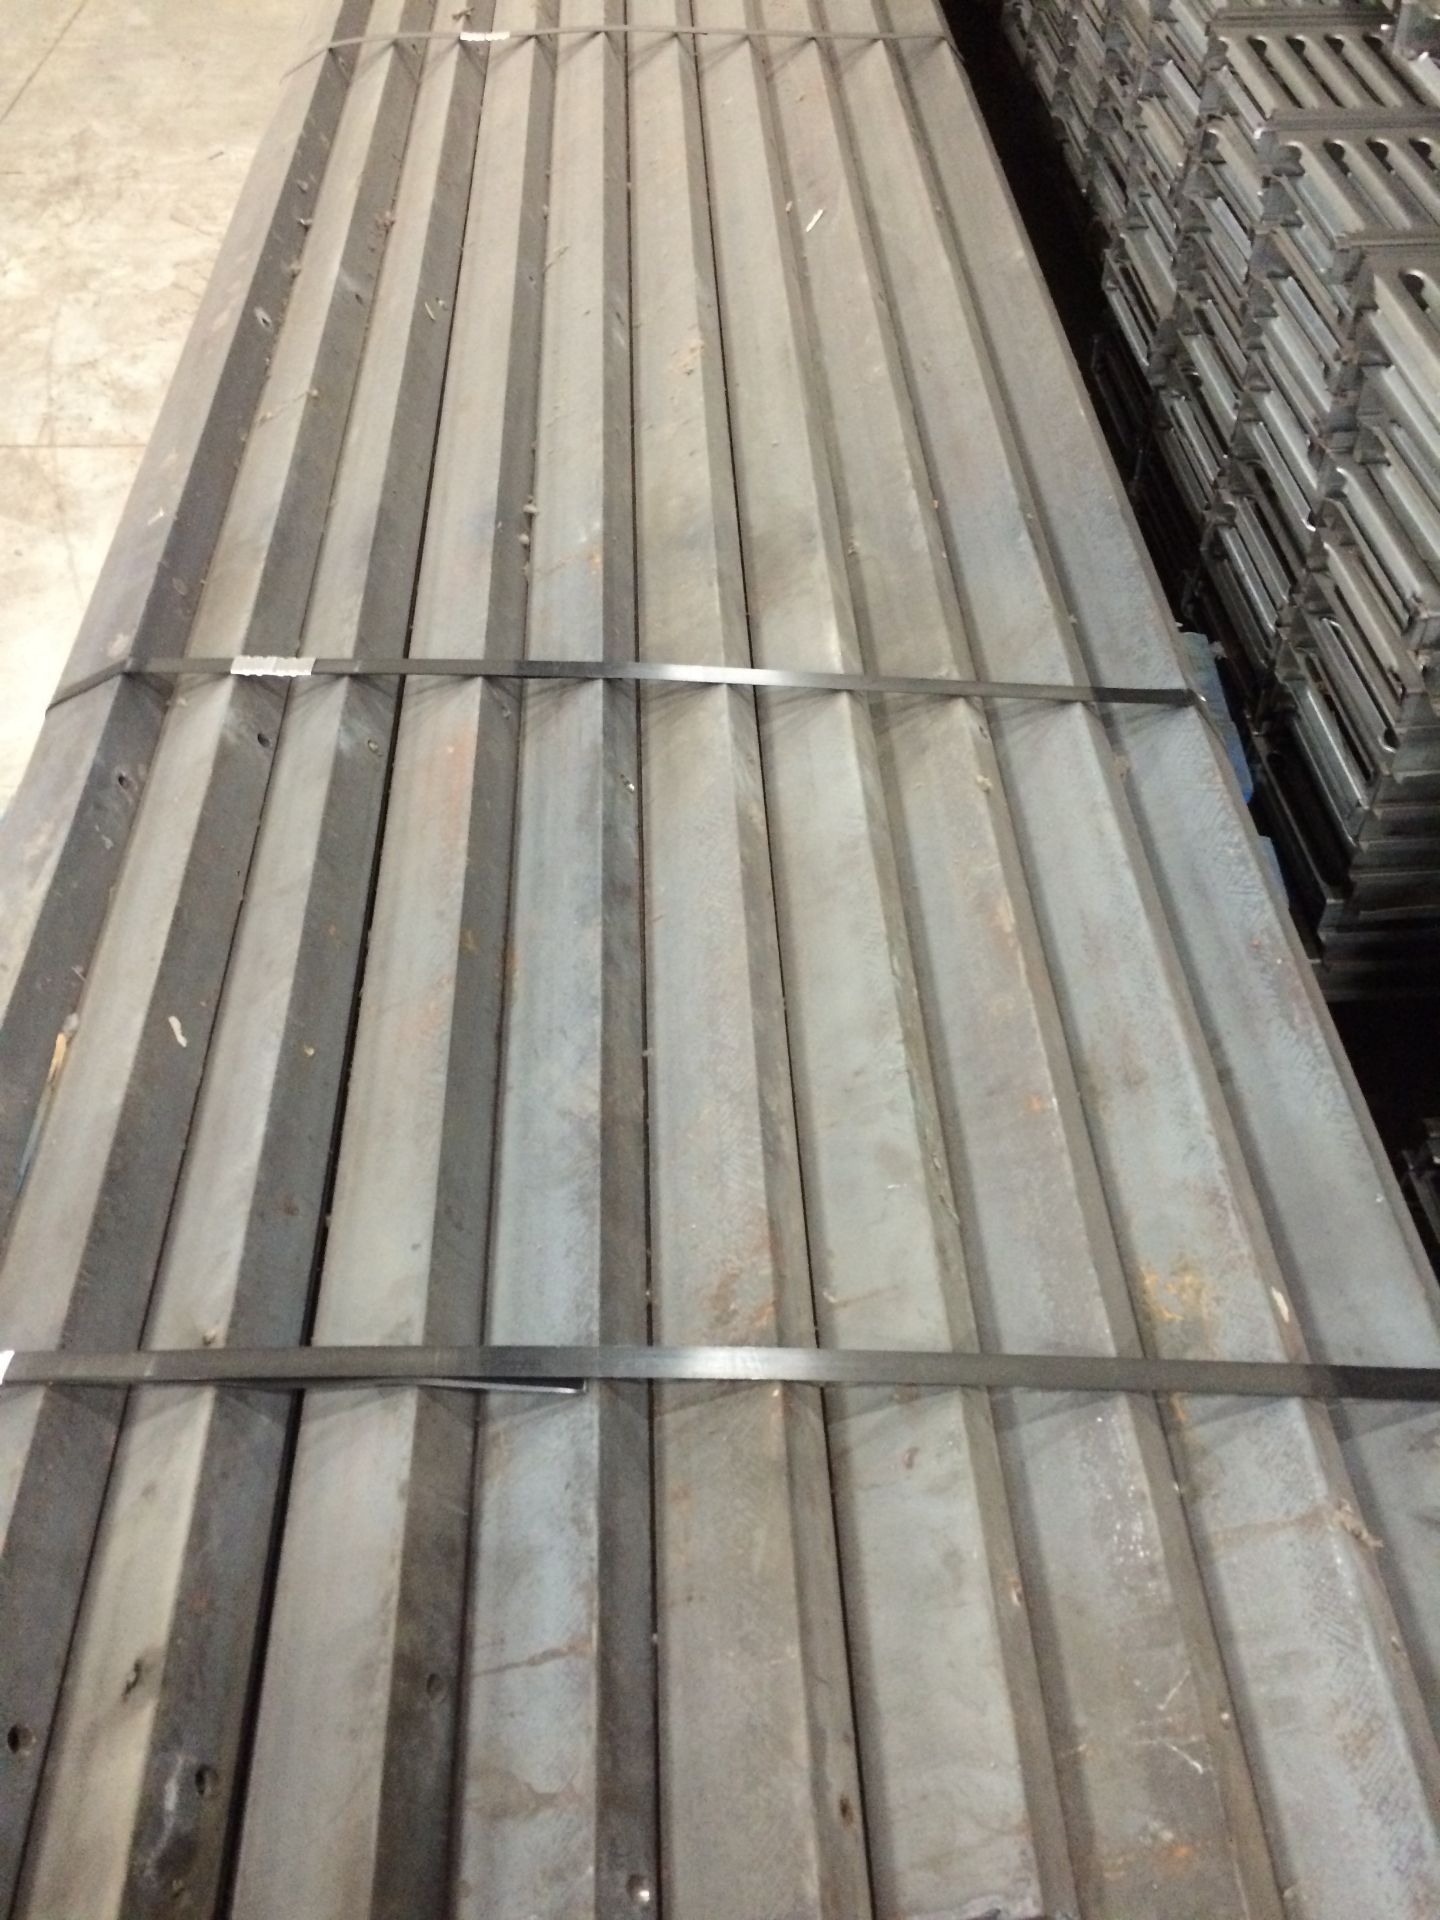 STRUCTURAL STEEL ANGLE IRON GUIDE RAIL SIZE: 3" X 2"X 3/8" X 20FT LONG, 50PCS, 50 TIMES MONEY - Image 5 of 5